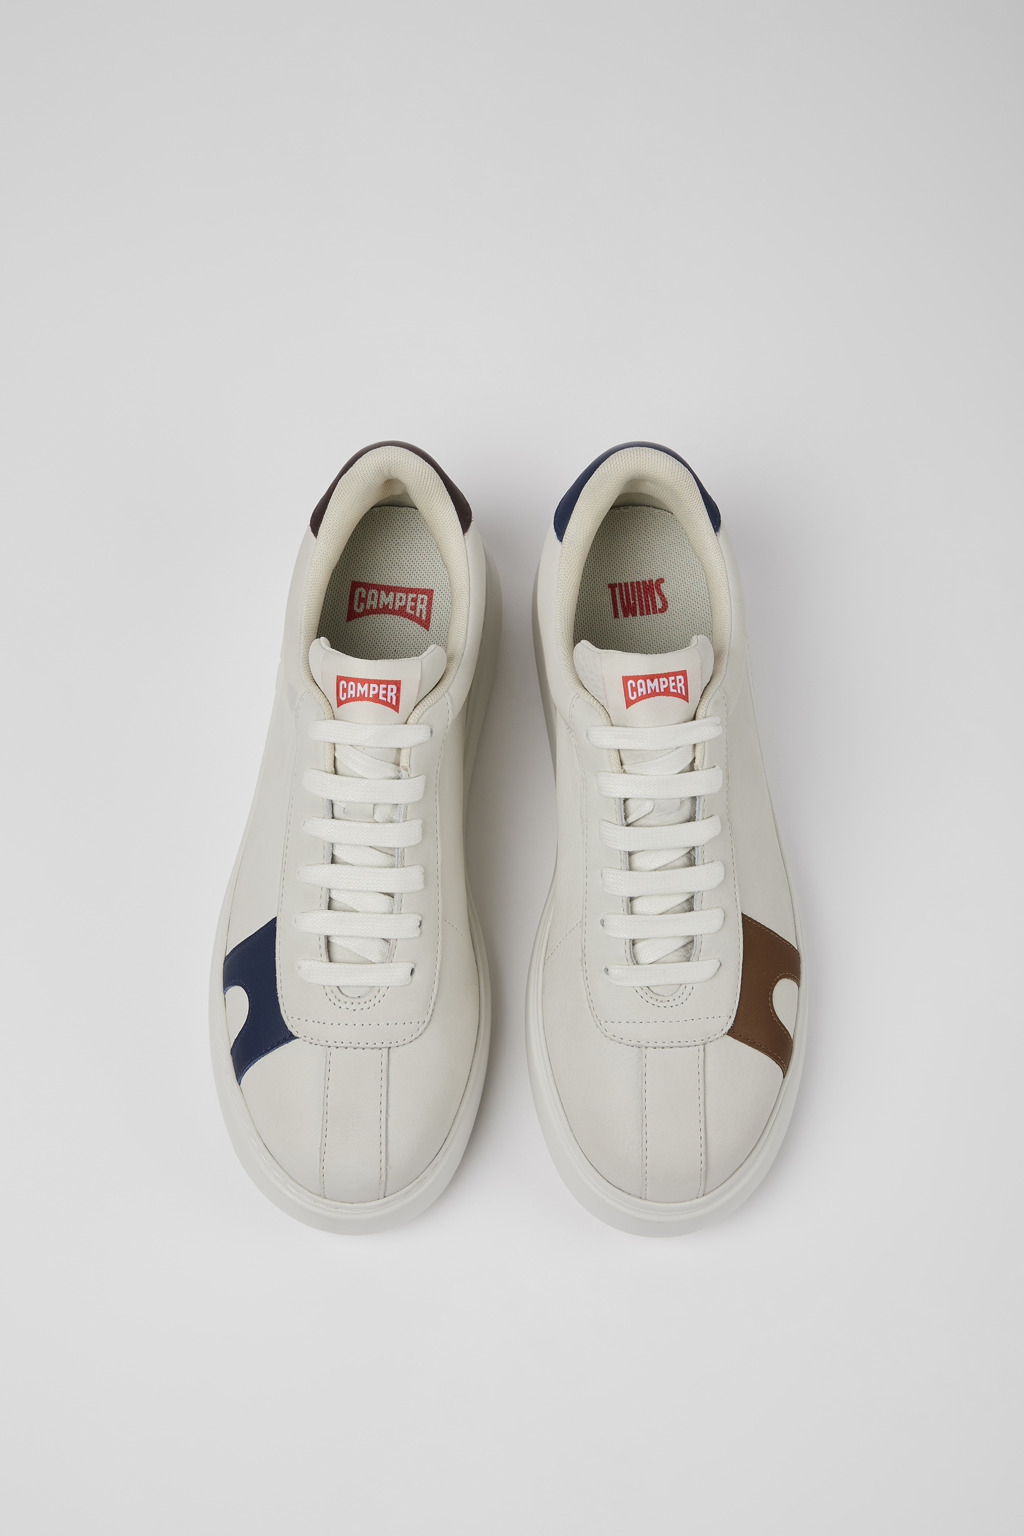 Twins White Sneakers for Men - Fall/Winter collection - Camper Japan